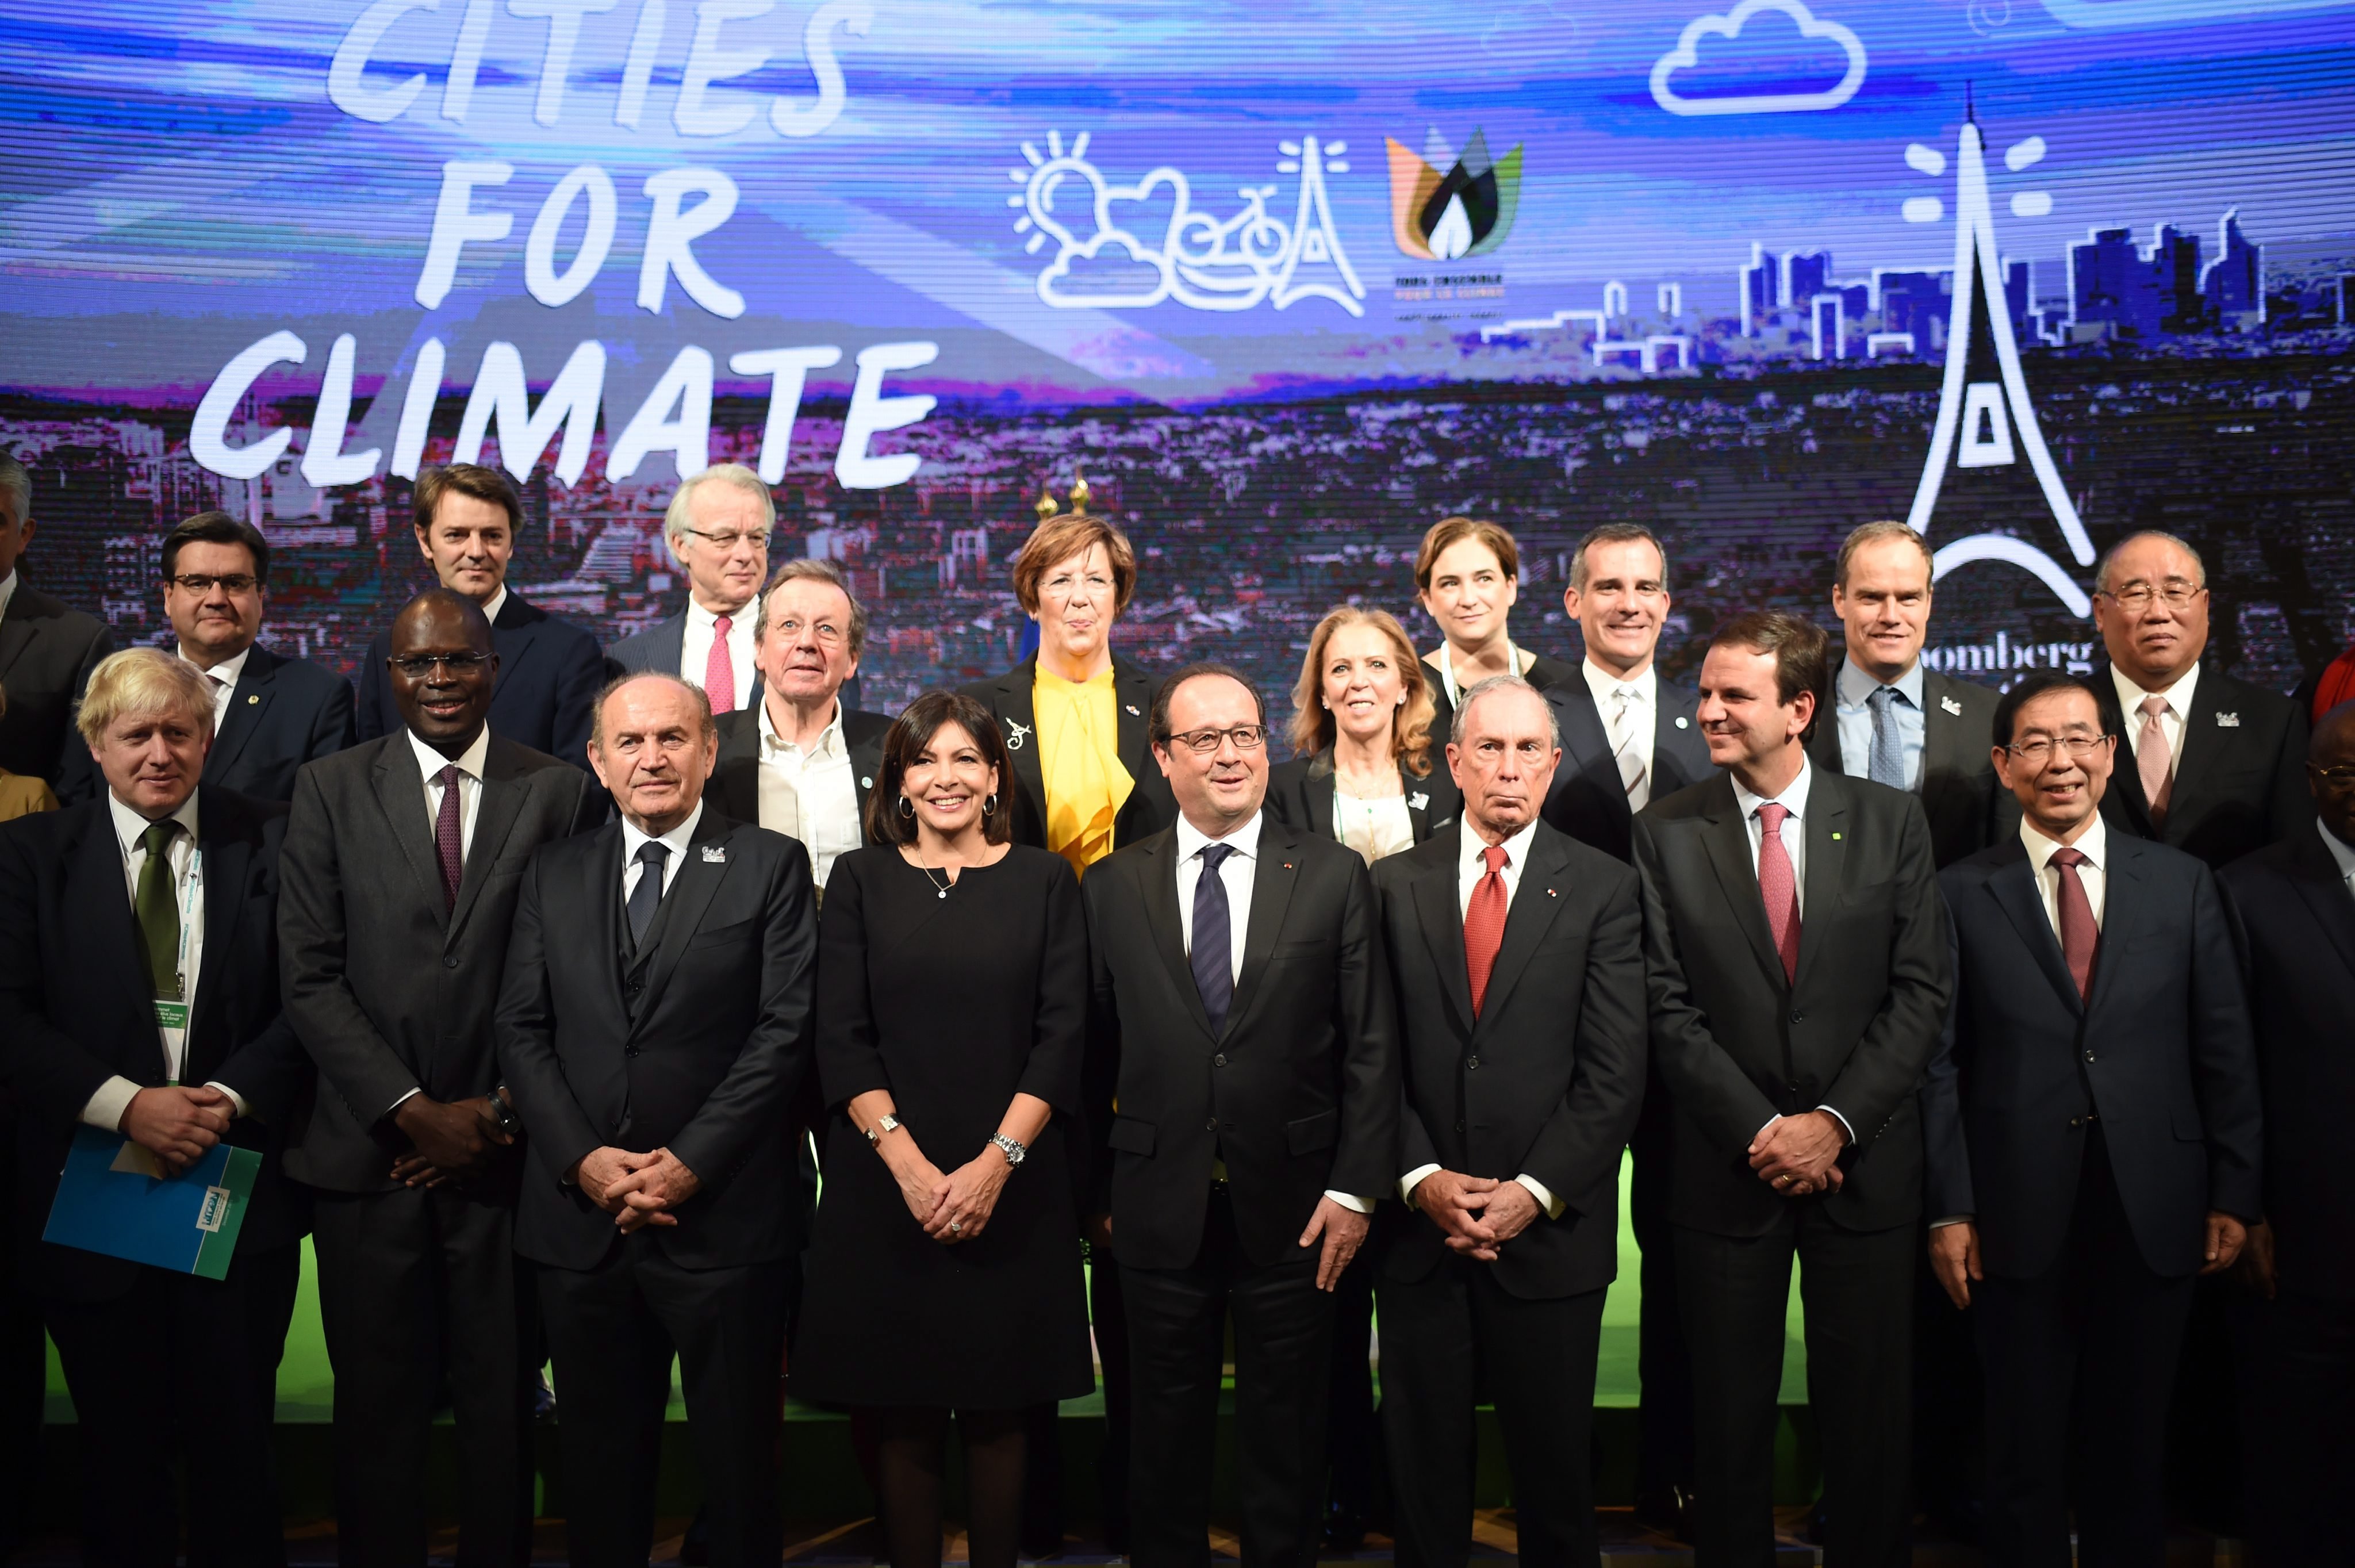 Francois Hollande poses with the Mayors of Paris, London, New York, Seoul, Dakar and Rio de Janeiro during the Mayors Summit, as part of the COP21 in Paris on Dec. 4, 2015. (Stephane de Sakutin—EPA)